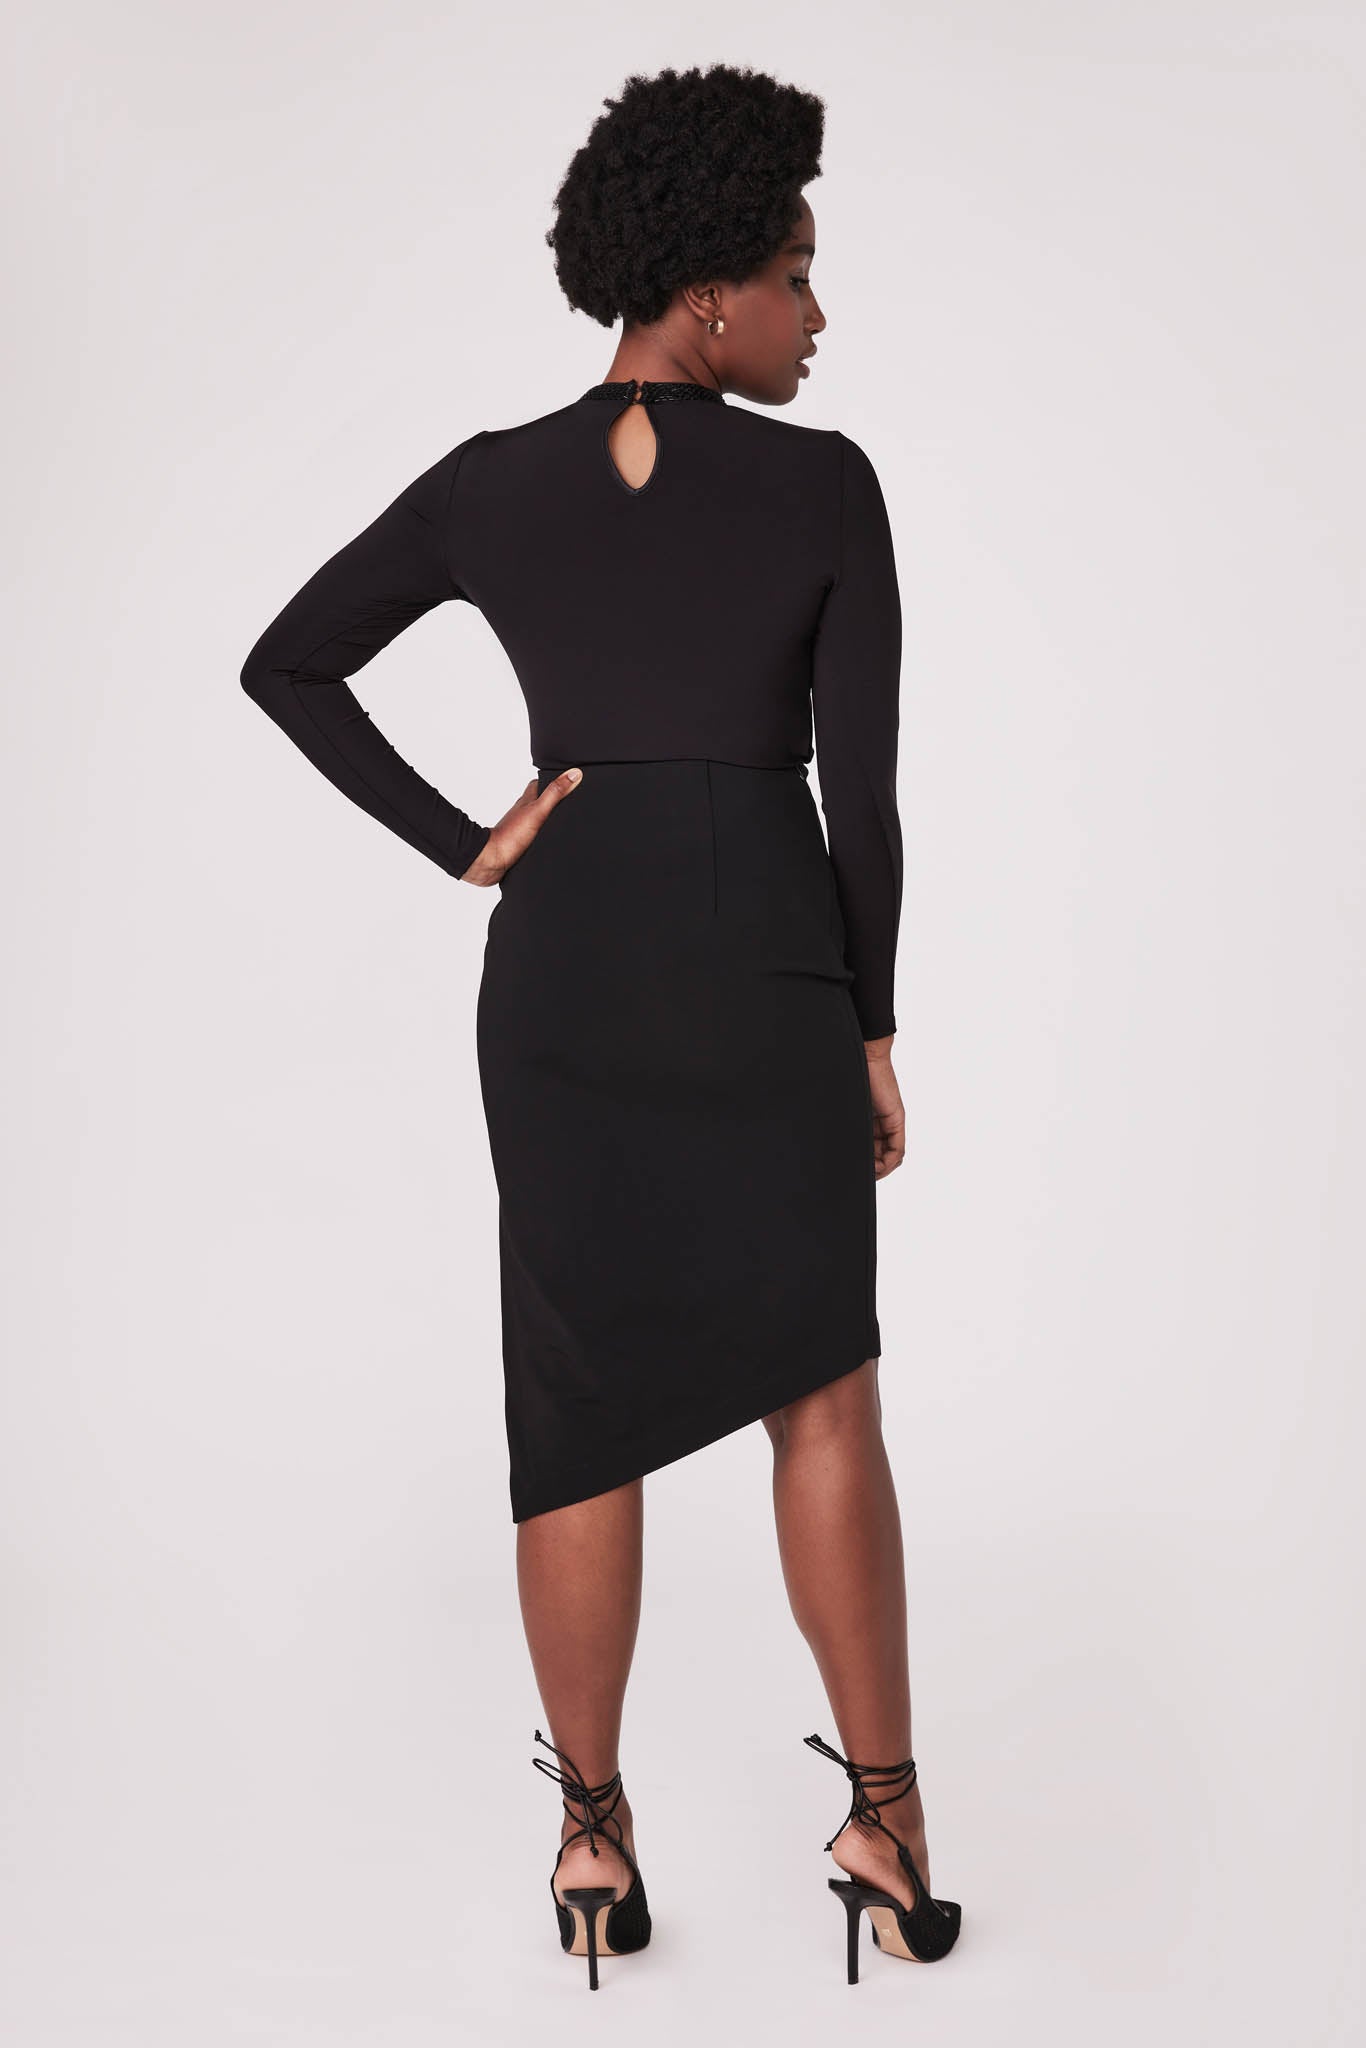 Back view of a woman wearing a high waisted black asymmetrical pencil skirt with cut out detail by Miriam Baker.